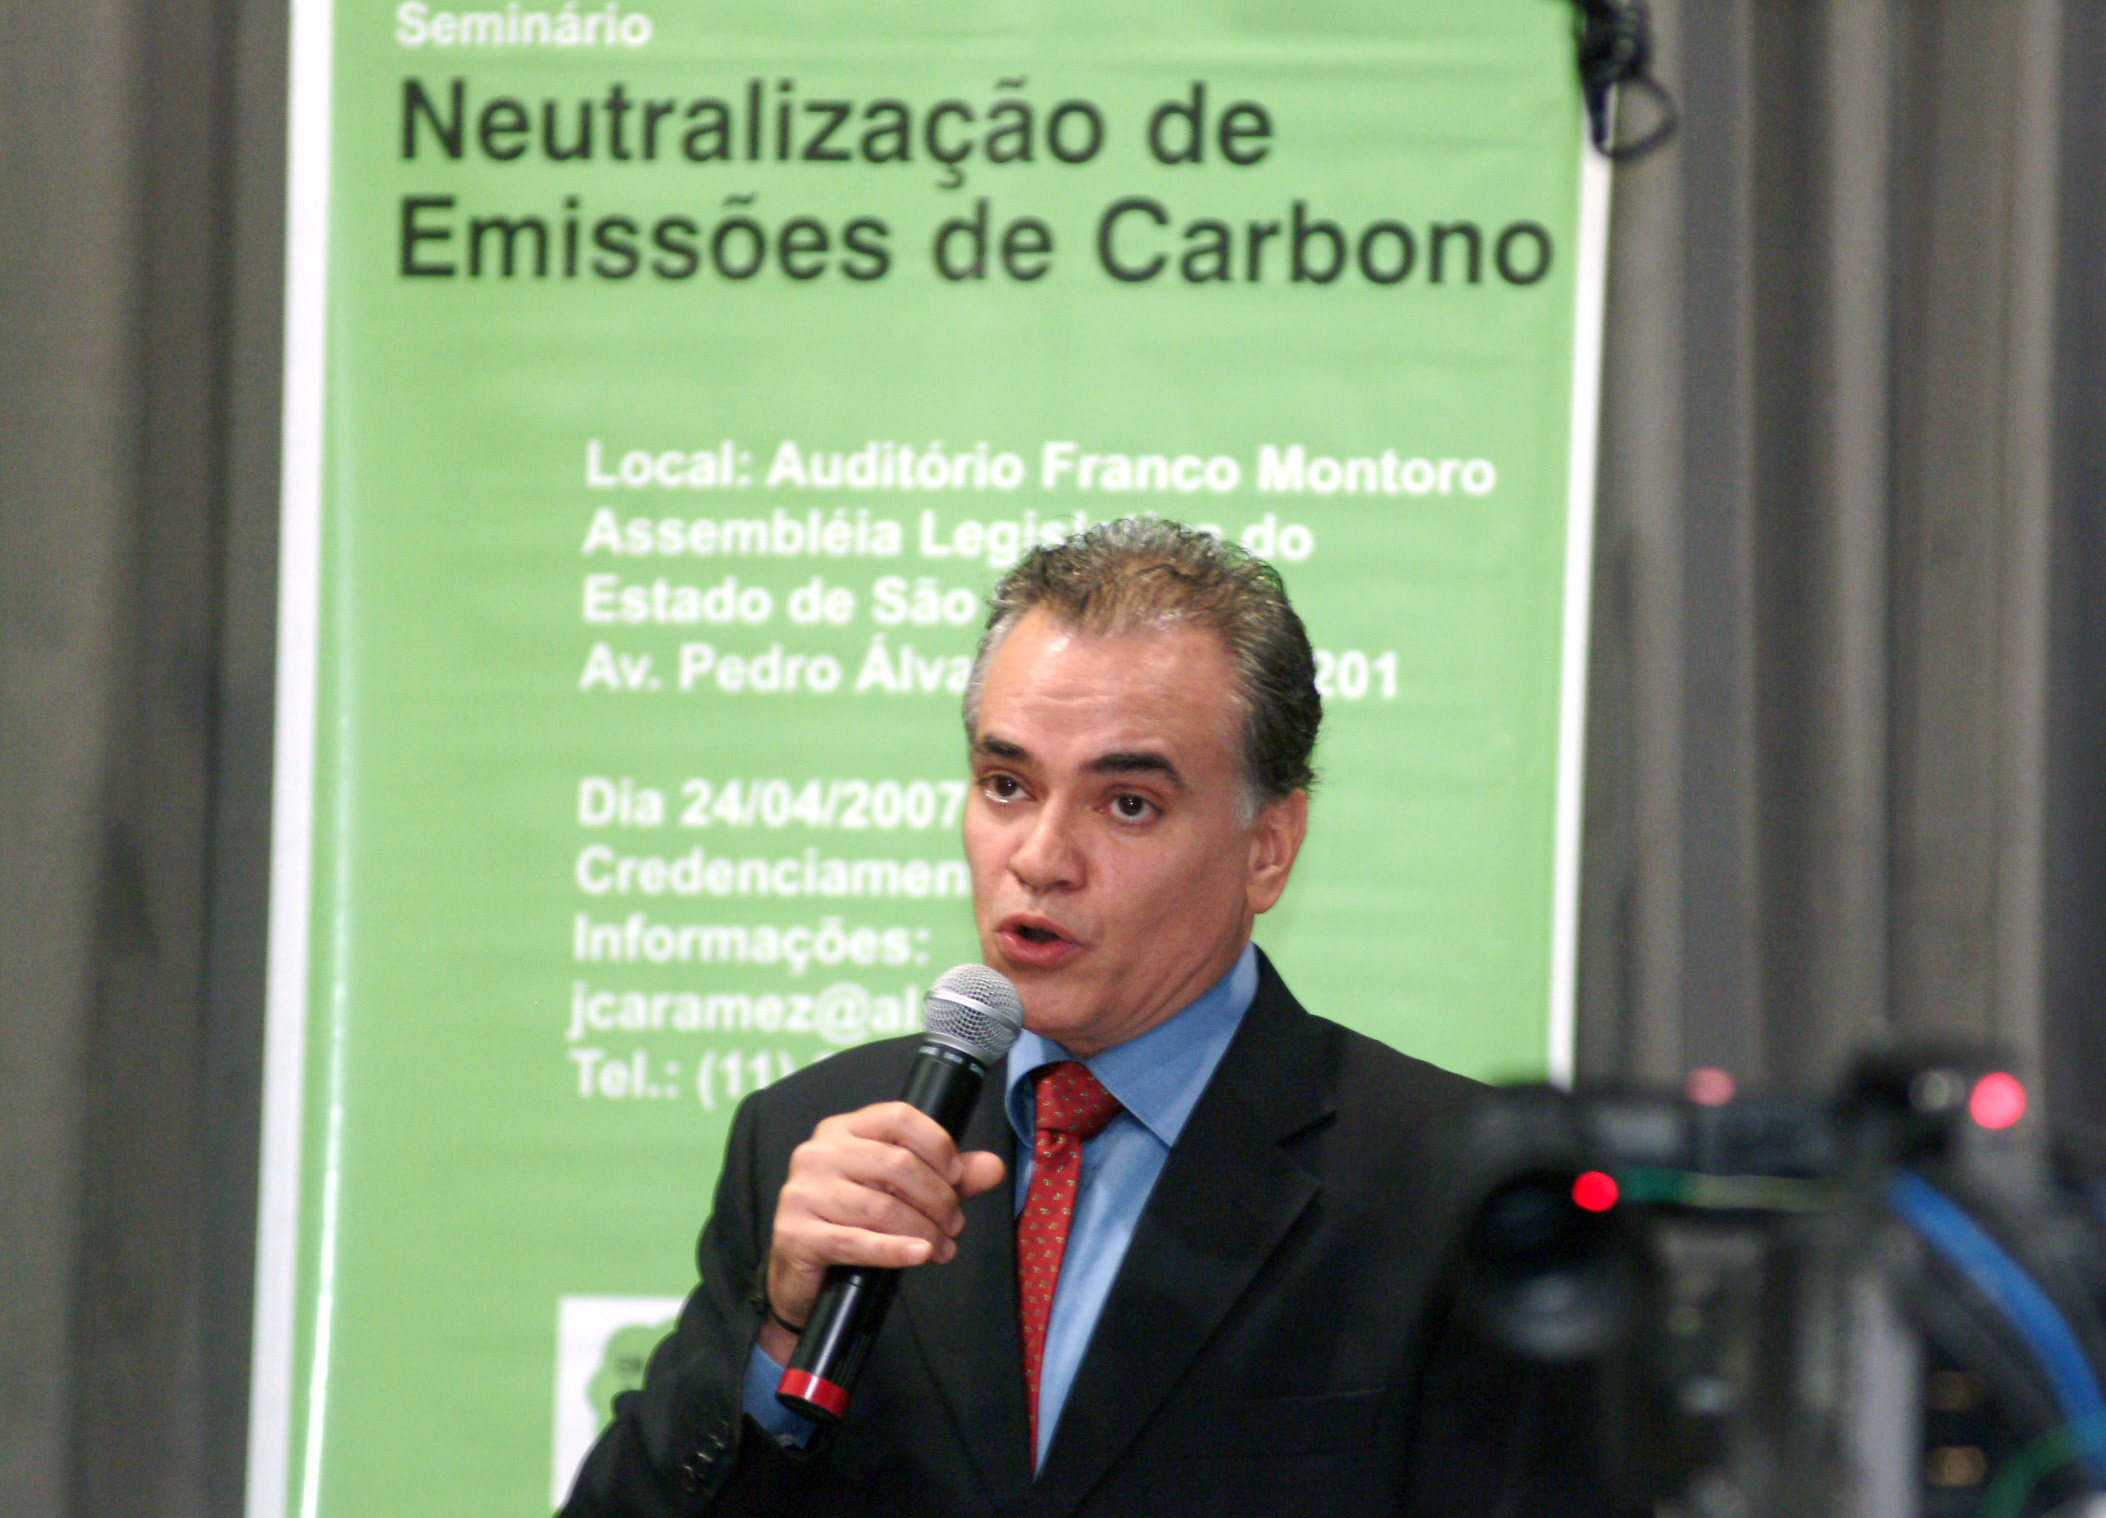 Luciano Marcondes <a style='float:right;color:#ccc' href='https://www3.al.sp.gov.br/repositorio/noticia/03-2008/CARBONO luciano marcondes01.jpg' target=_blank><i class='bi bi-zoom-in'></i> Clique para ver a imagem </a>